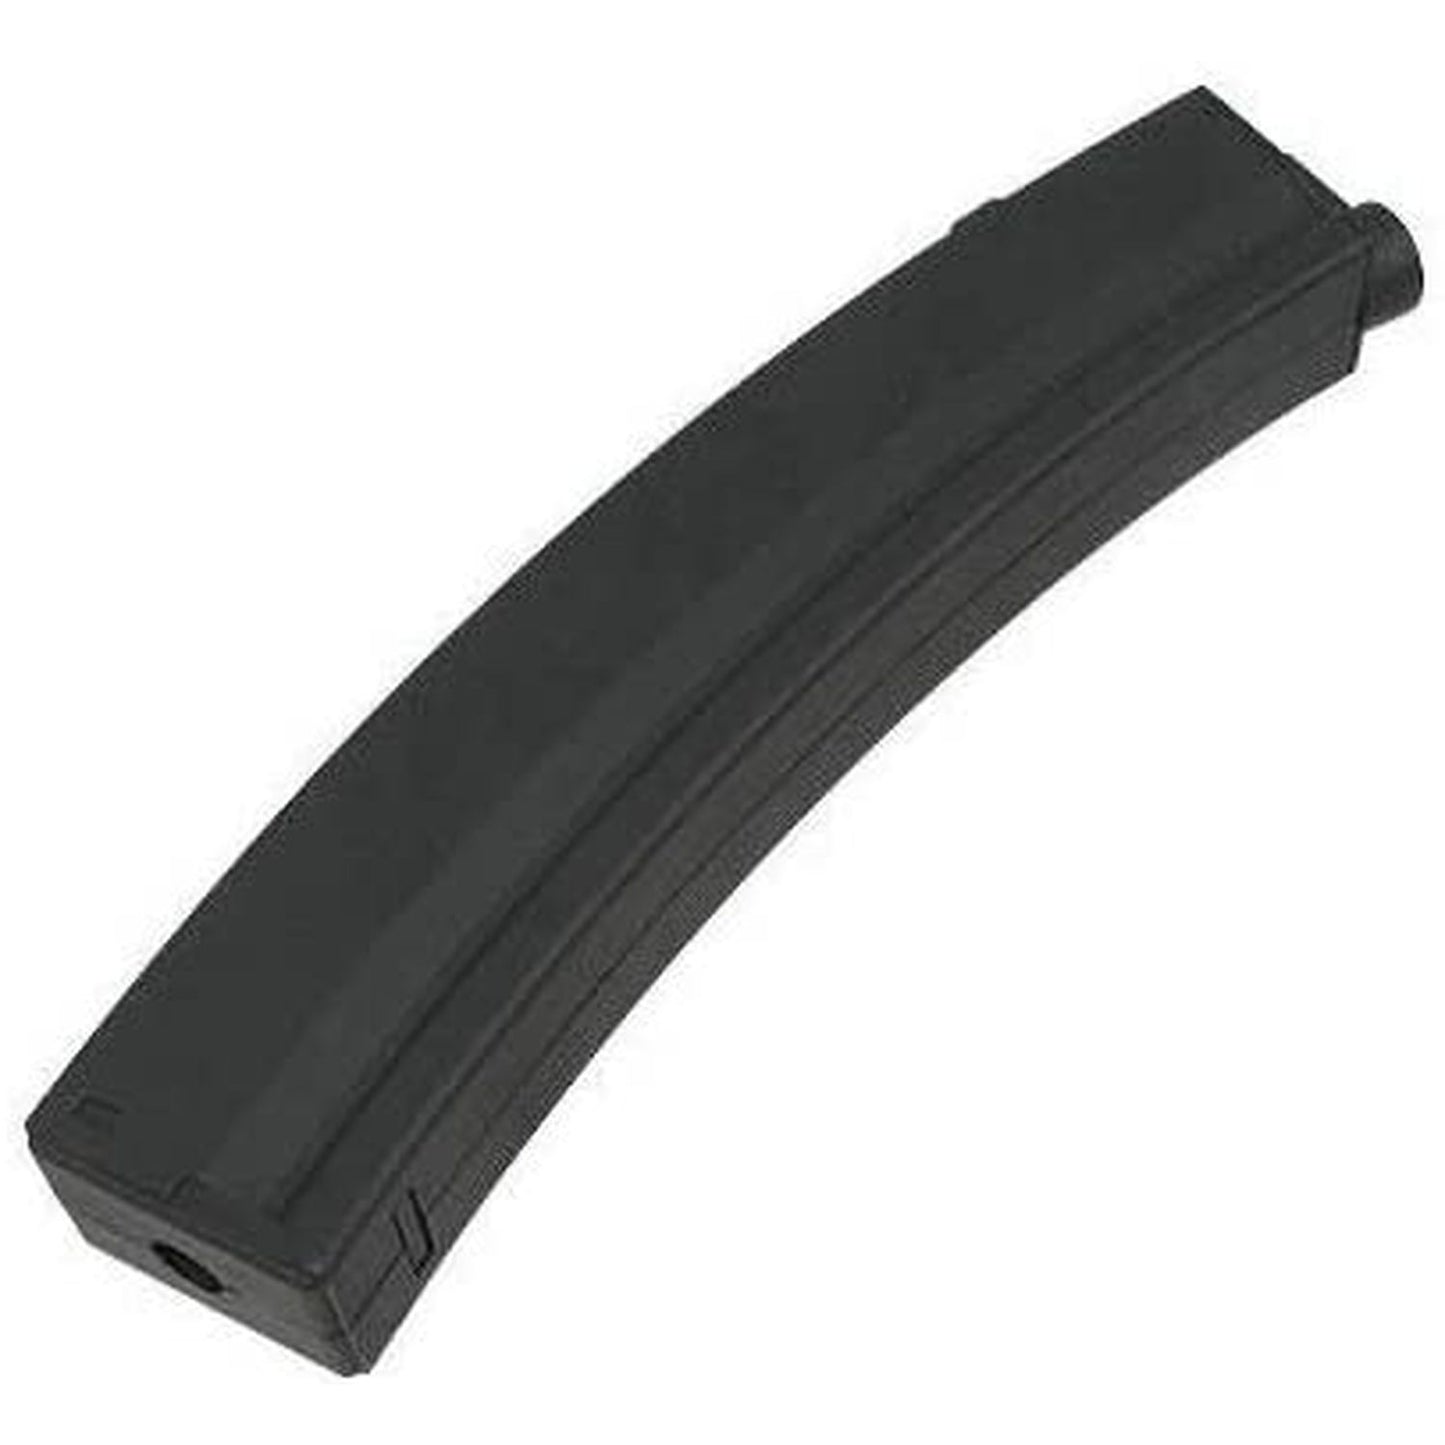 King Arms PDW Airsoft Magazine Loaders